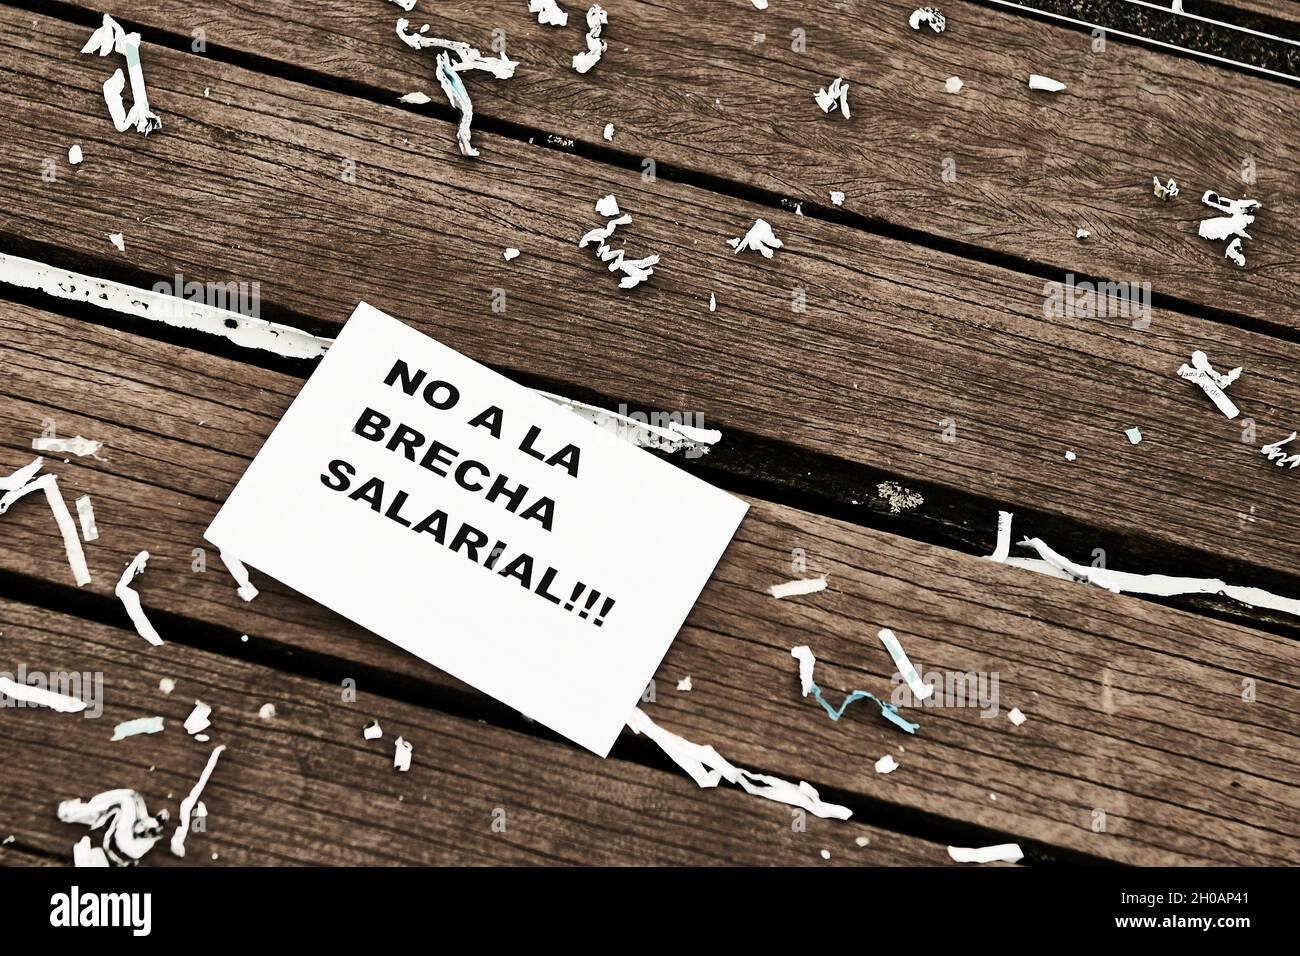 Paper on the floor with the phrase 'no a la Brecha salarial' Stock Photo